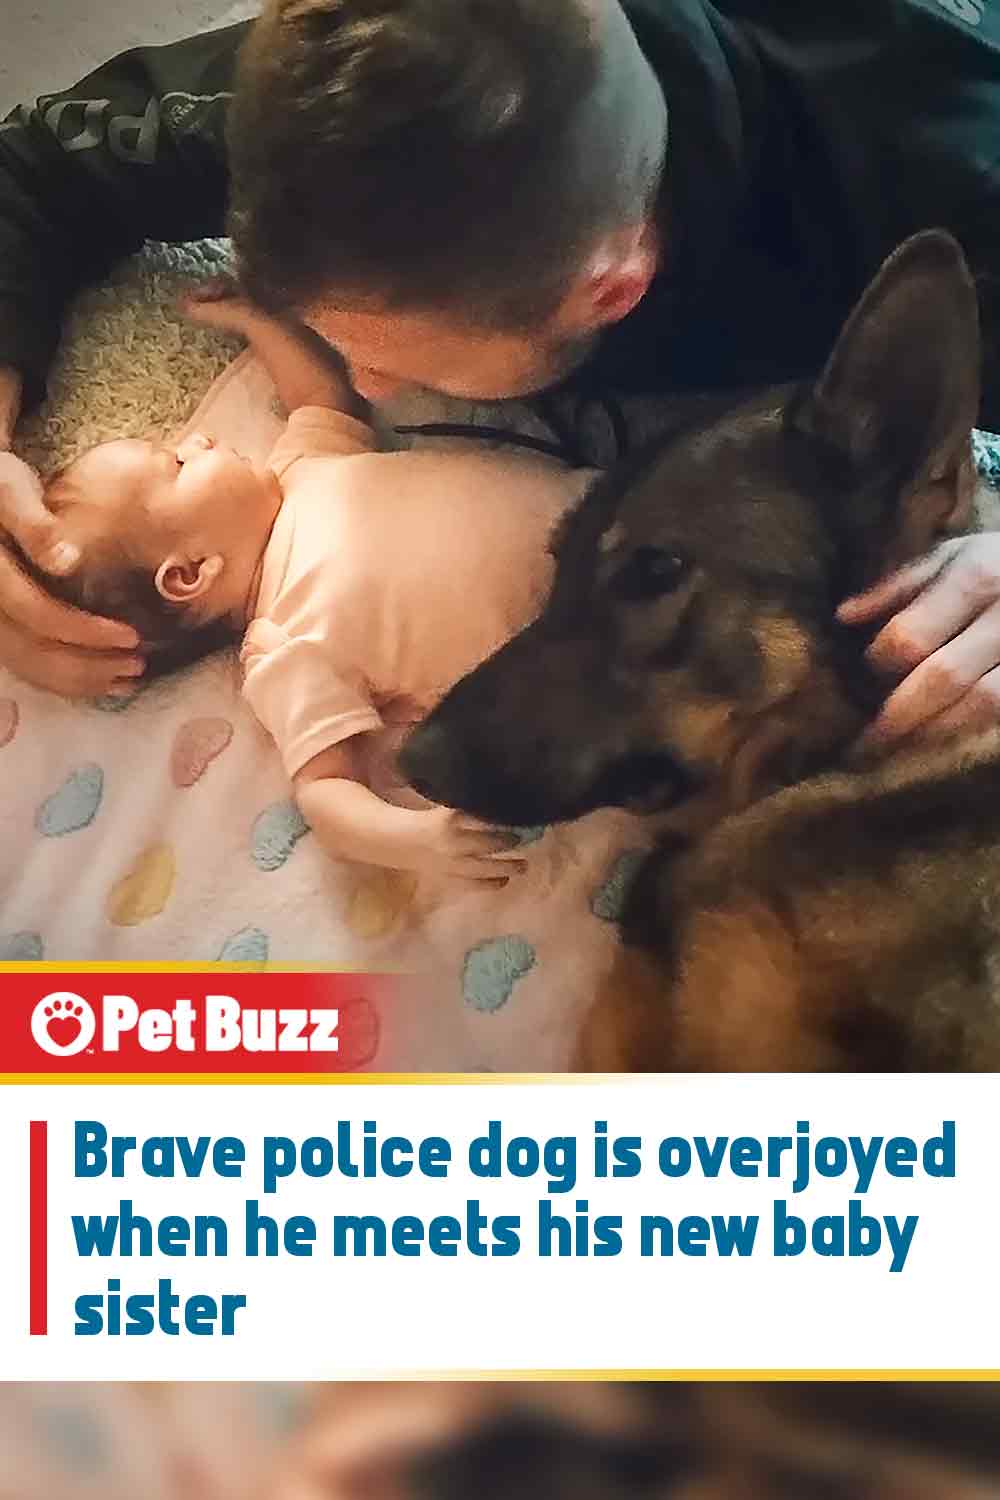 Brave police dog is overjoyed when he meets his new baby sister